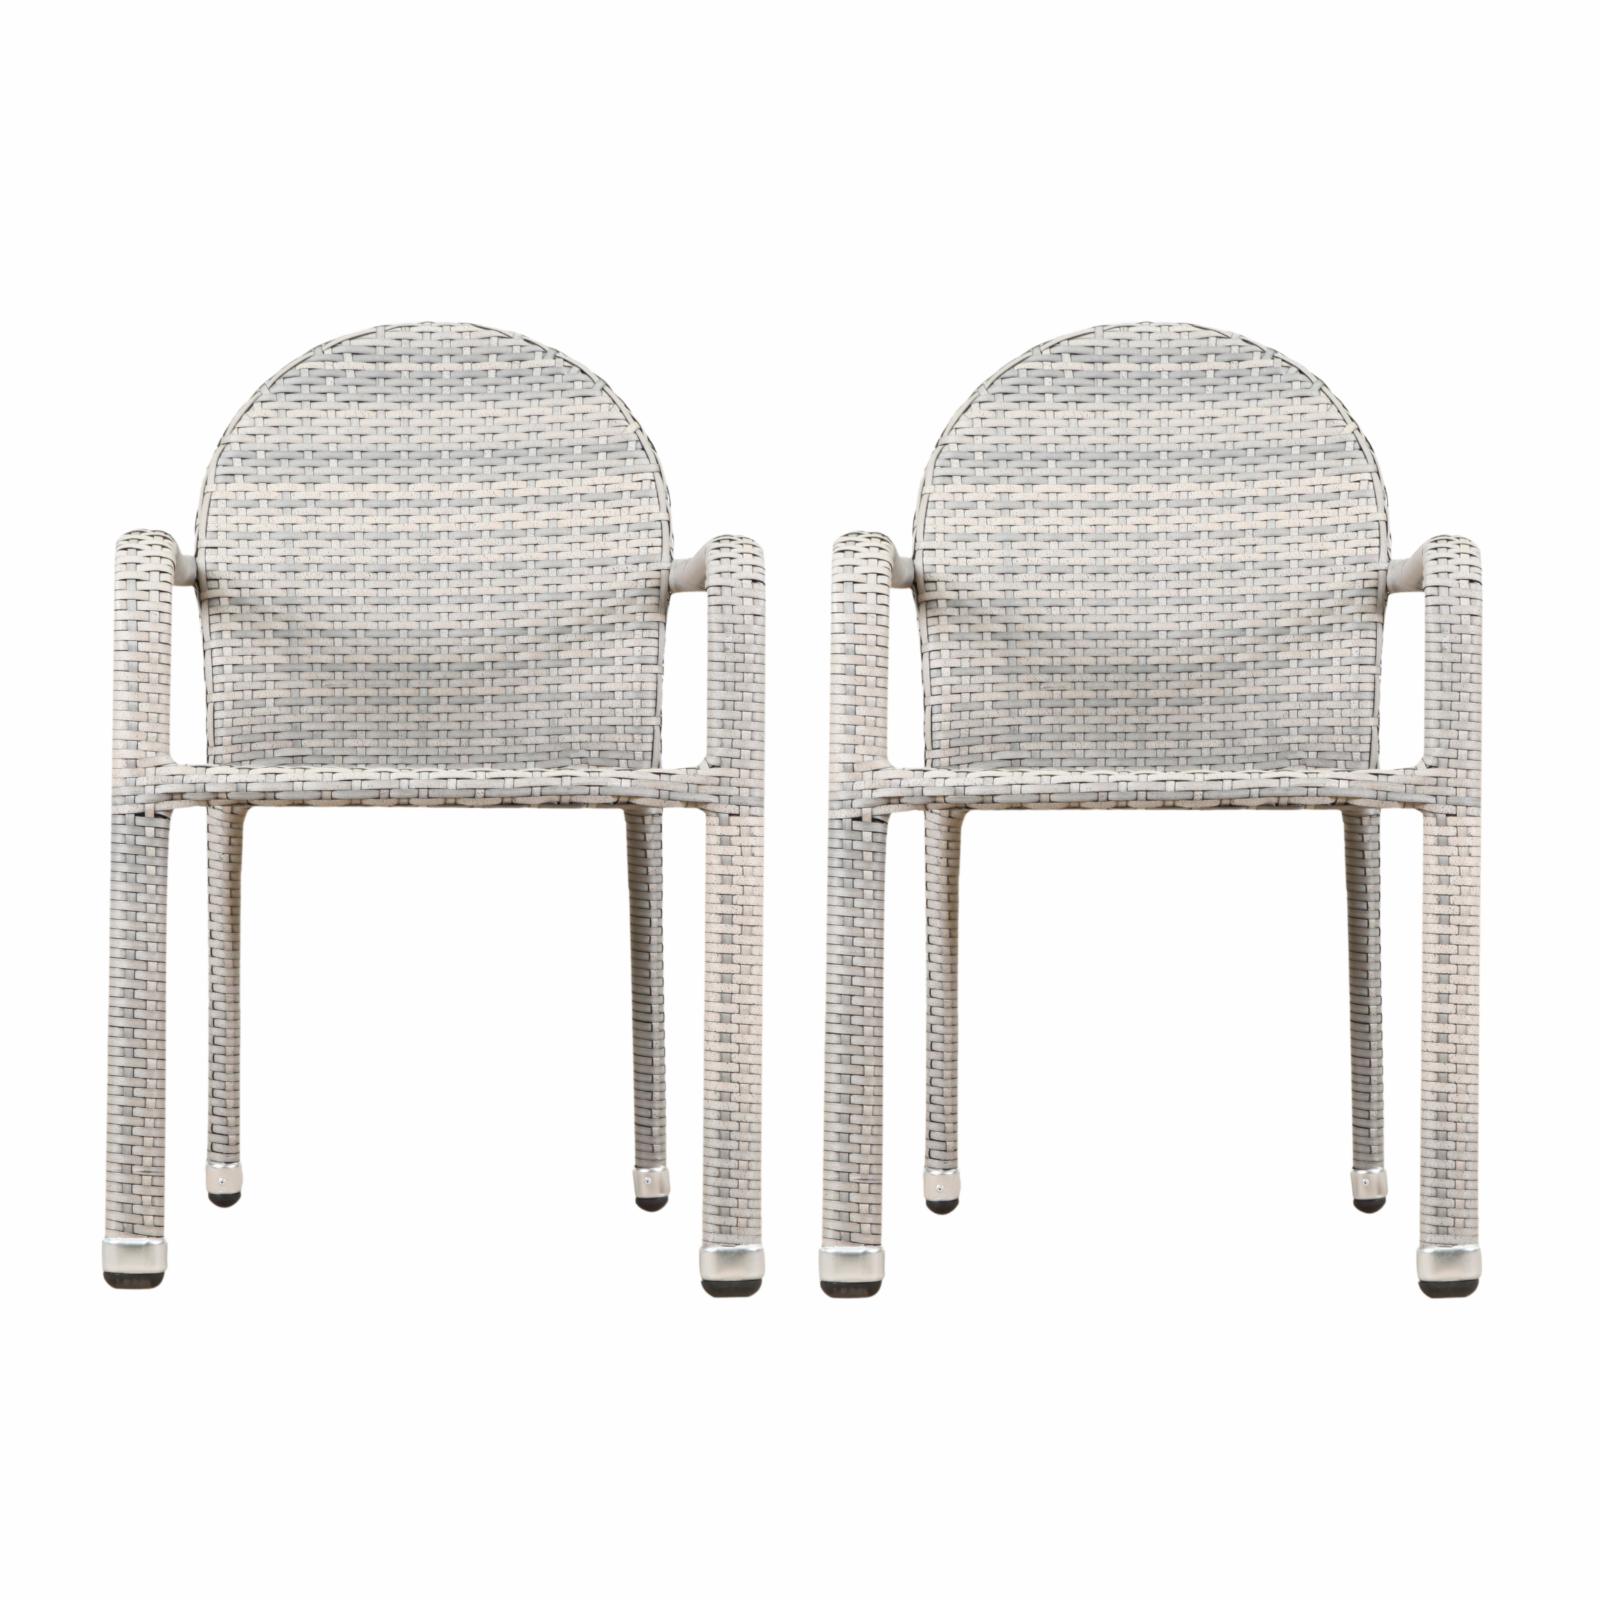 Ariyaan Outdoor Wicker Stacking Dining Chairs - Set of 2 - Multibrown - image 1 of 10